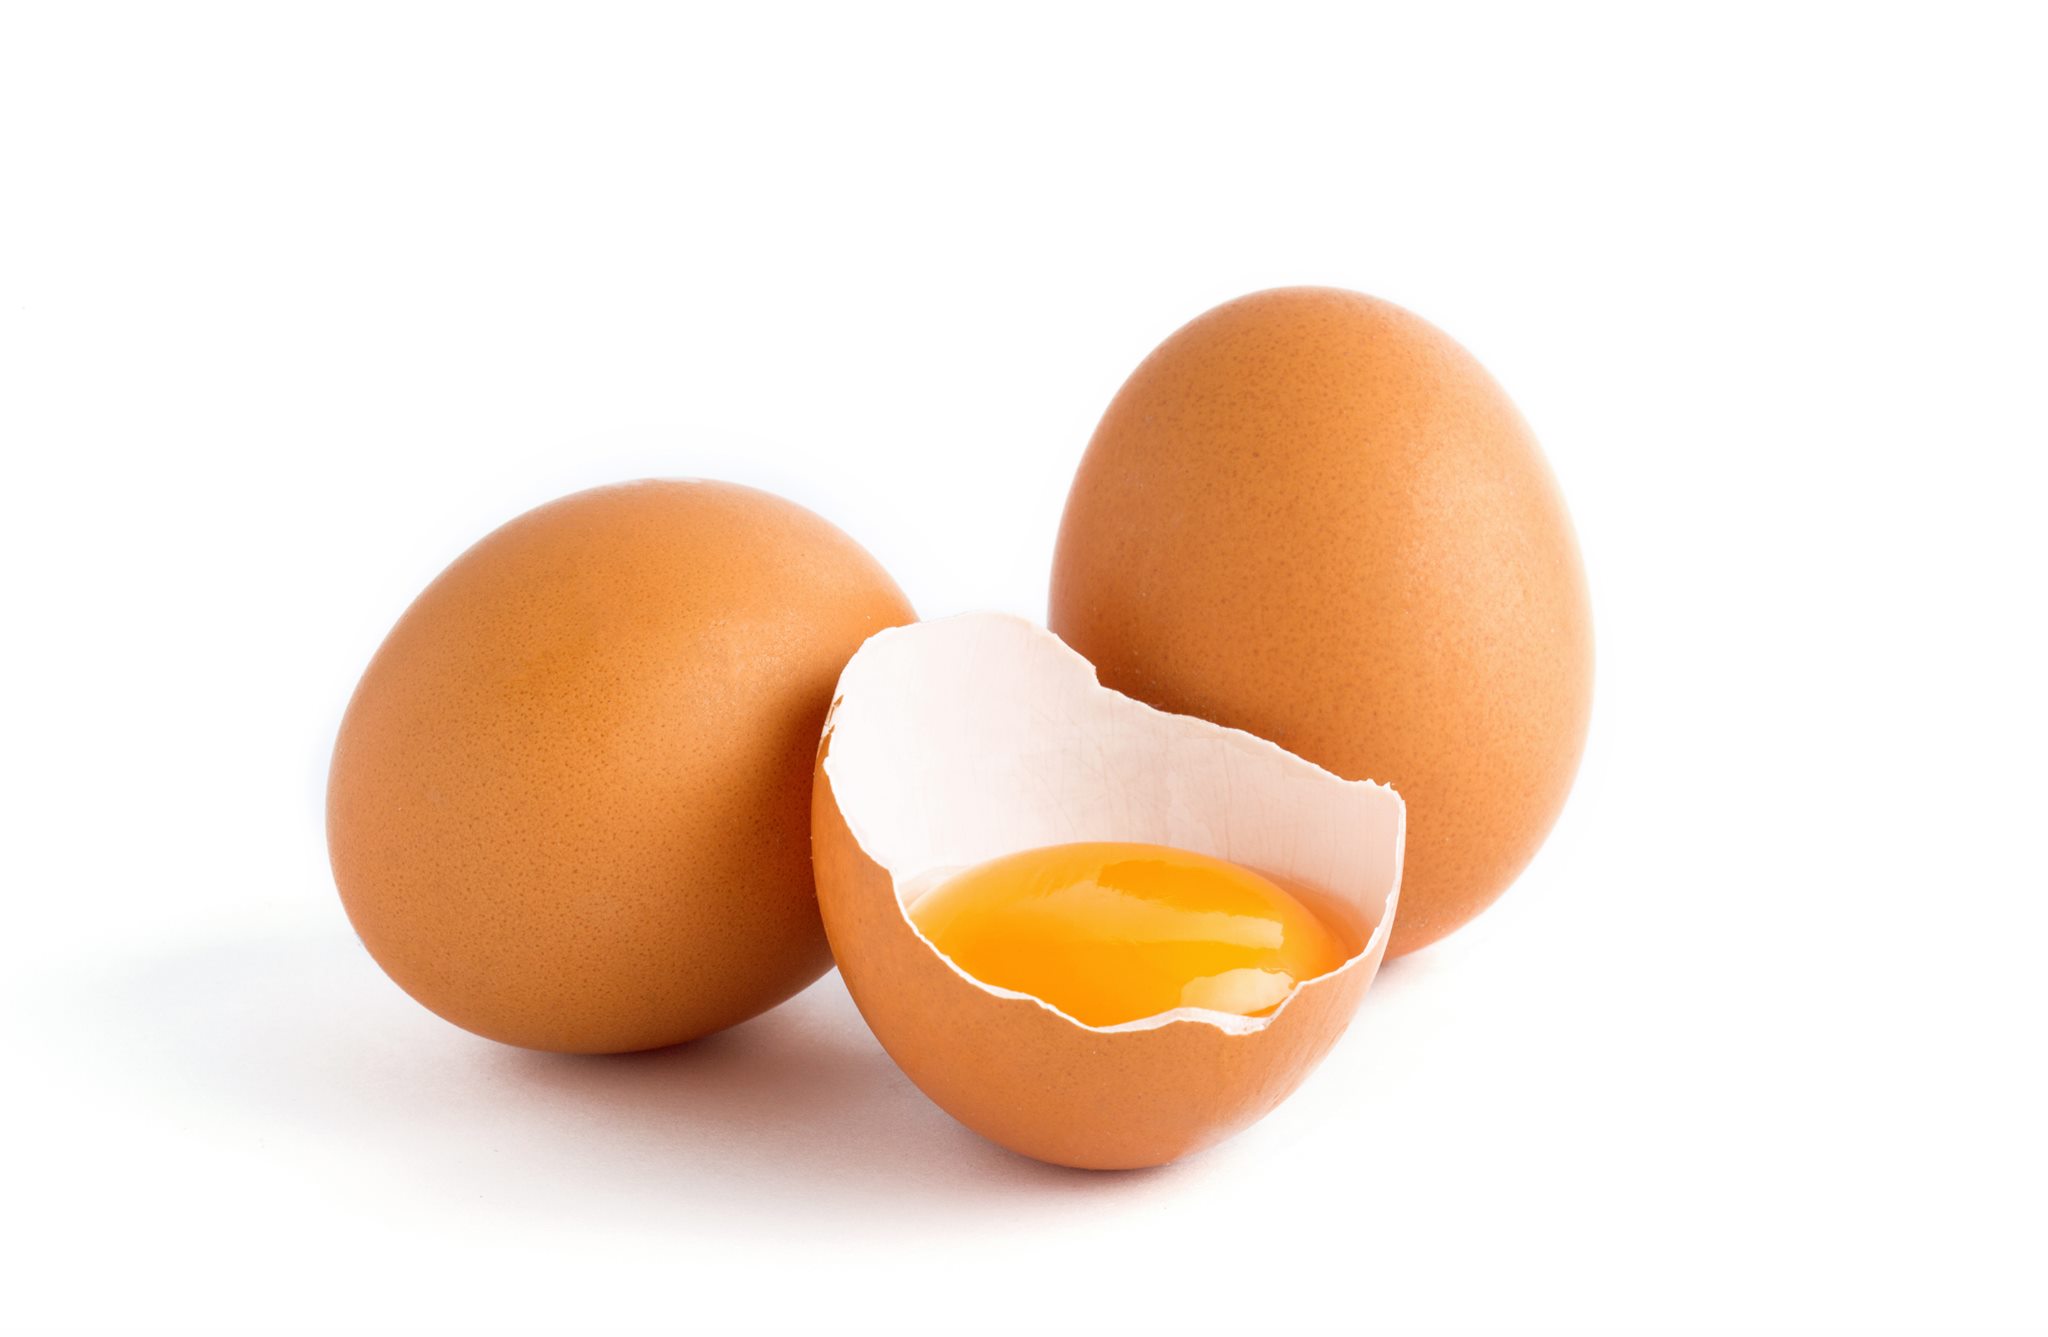 Are eggs bad for psoriasis